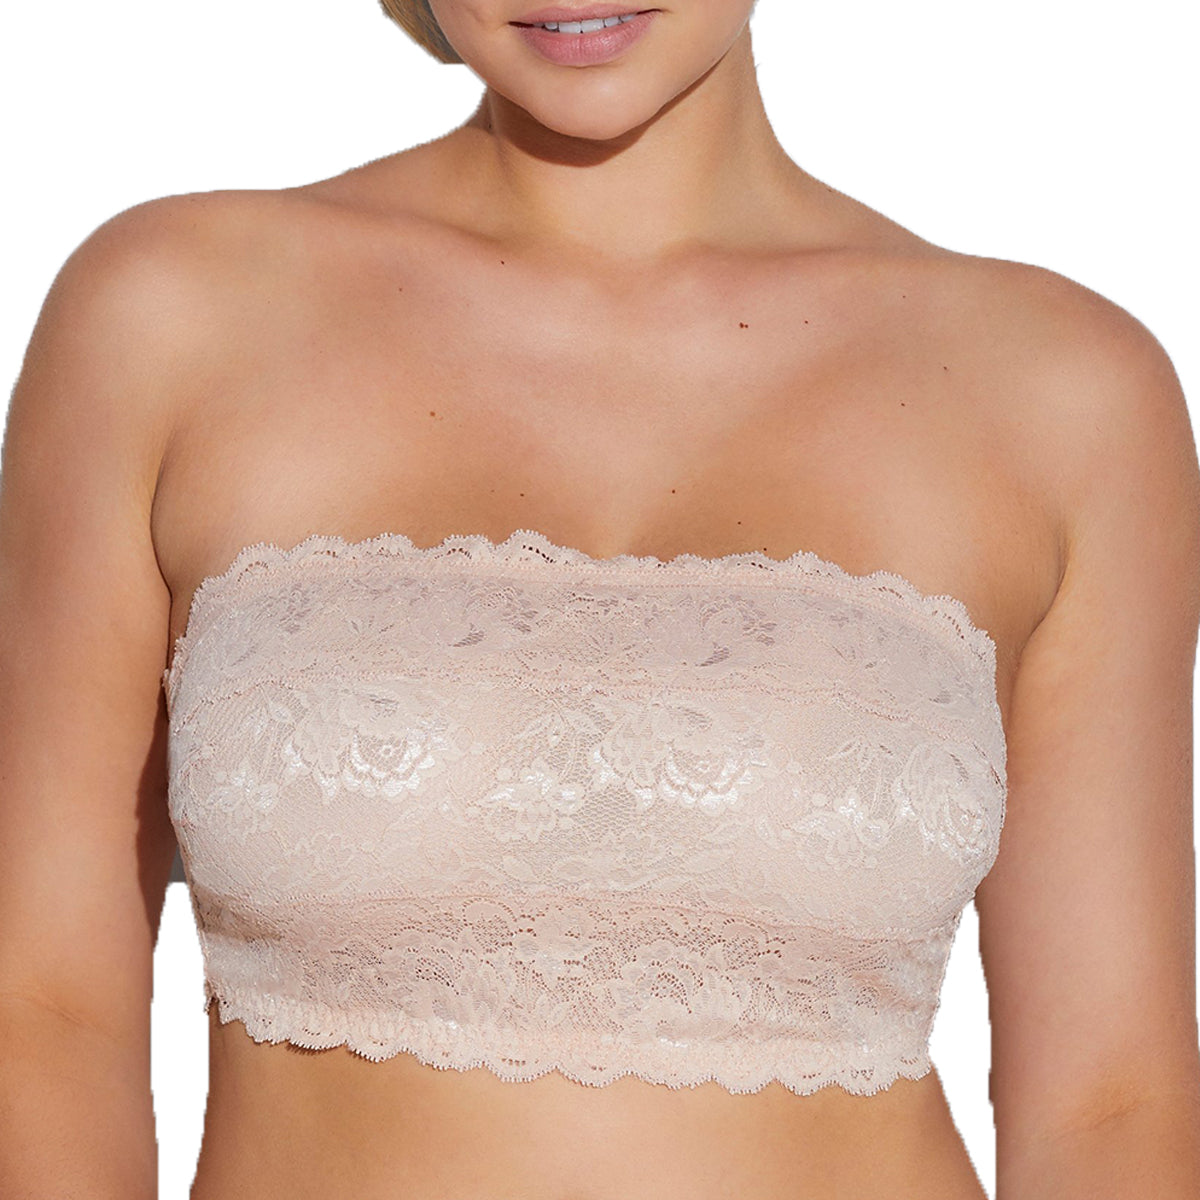 Softline - Want to avoid those painful red marks? Visit  www.softlinegirl.com and find yourself a bra that fits well and accentuates  your breasts! #SoftlineGirl #BeASoftlineGirl #EffortlessYou #BraStory  #SoftlineBras #CottonBras #ComfyBras #Cotton #Bras